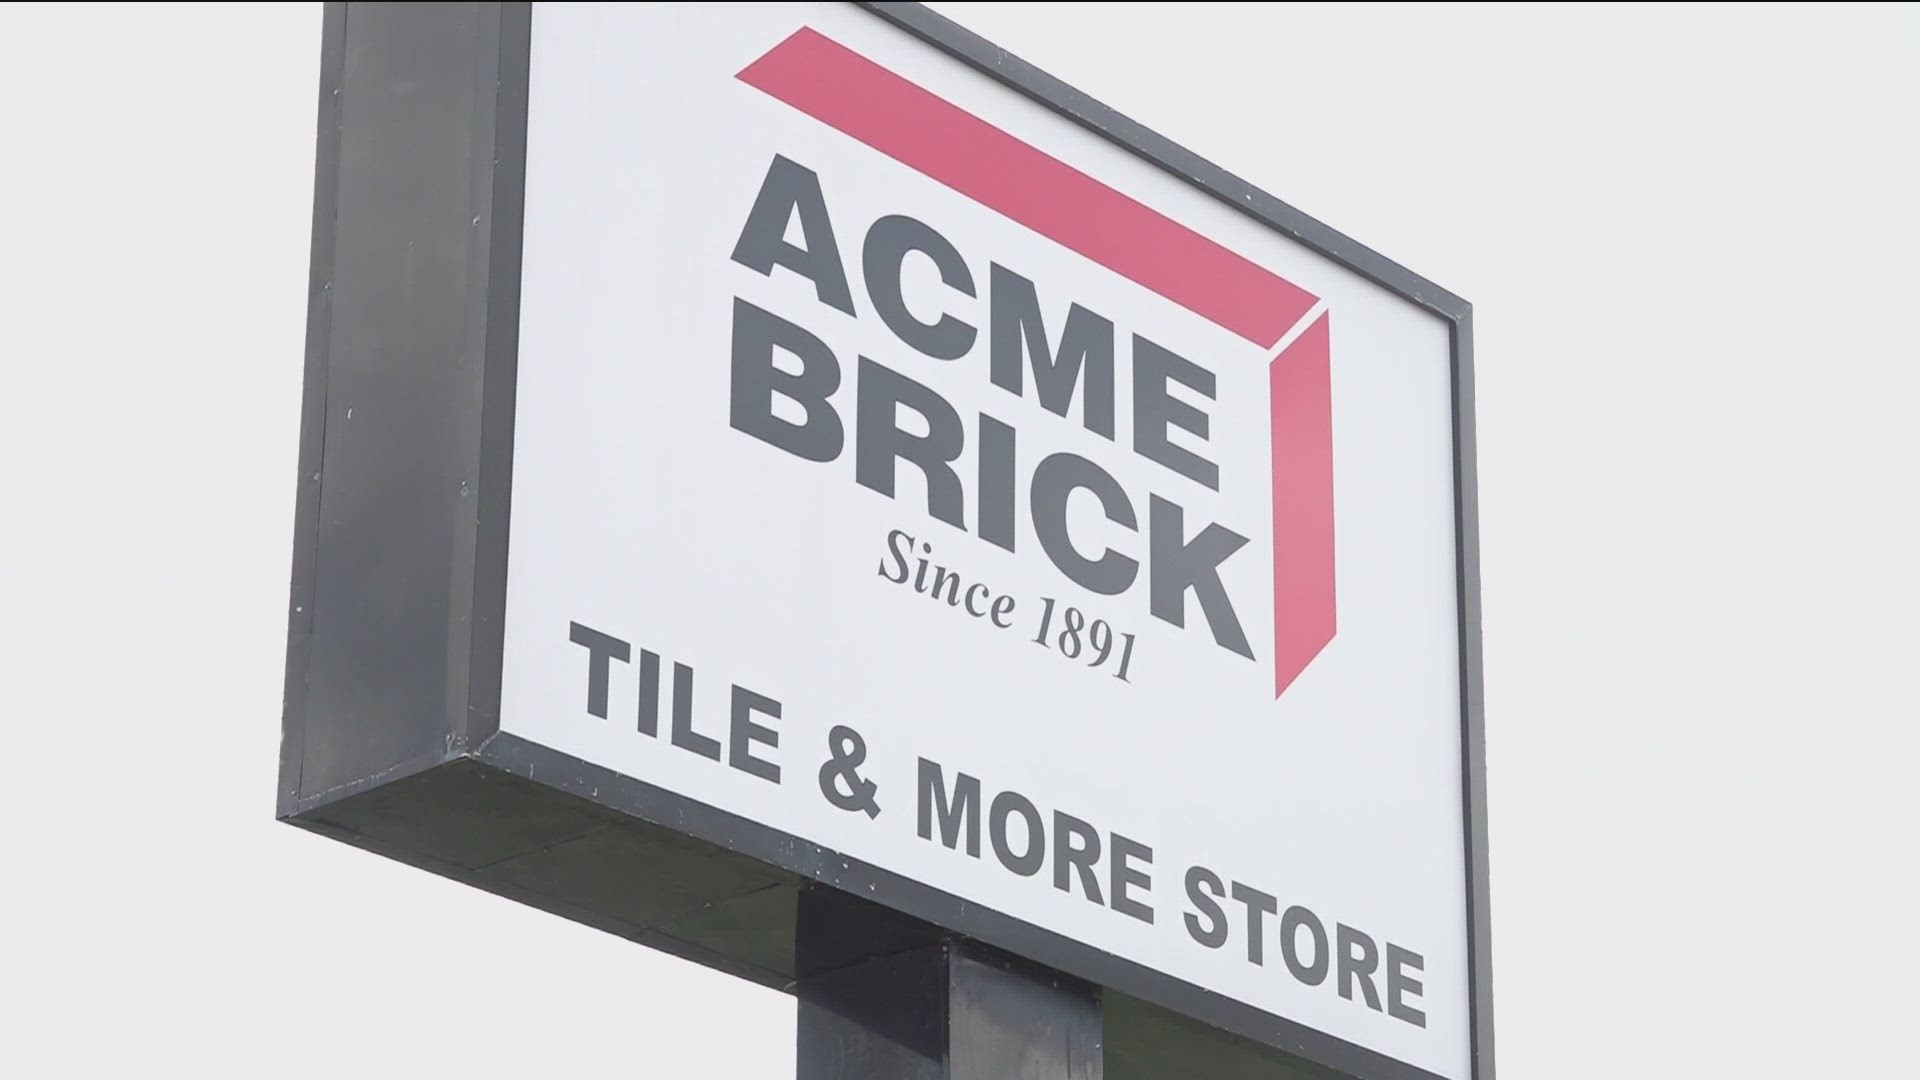 The land, previously owned by ACME Brick Company, will be turned into a park.